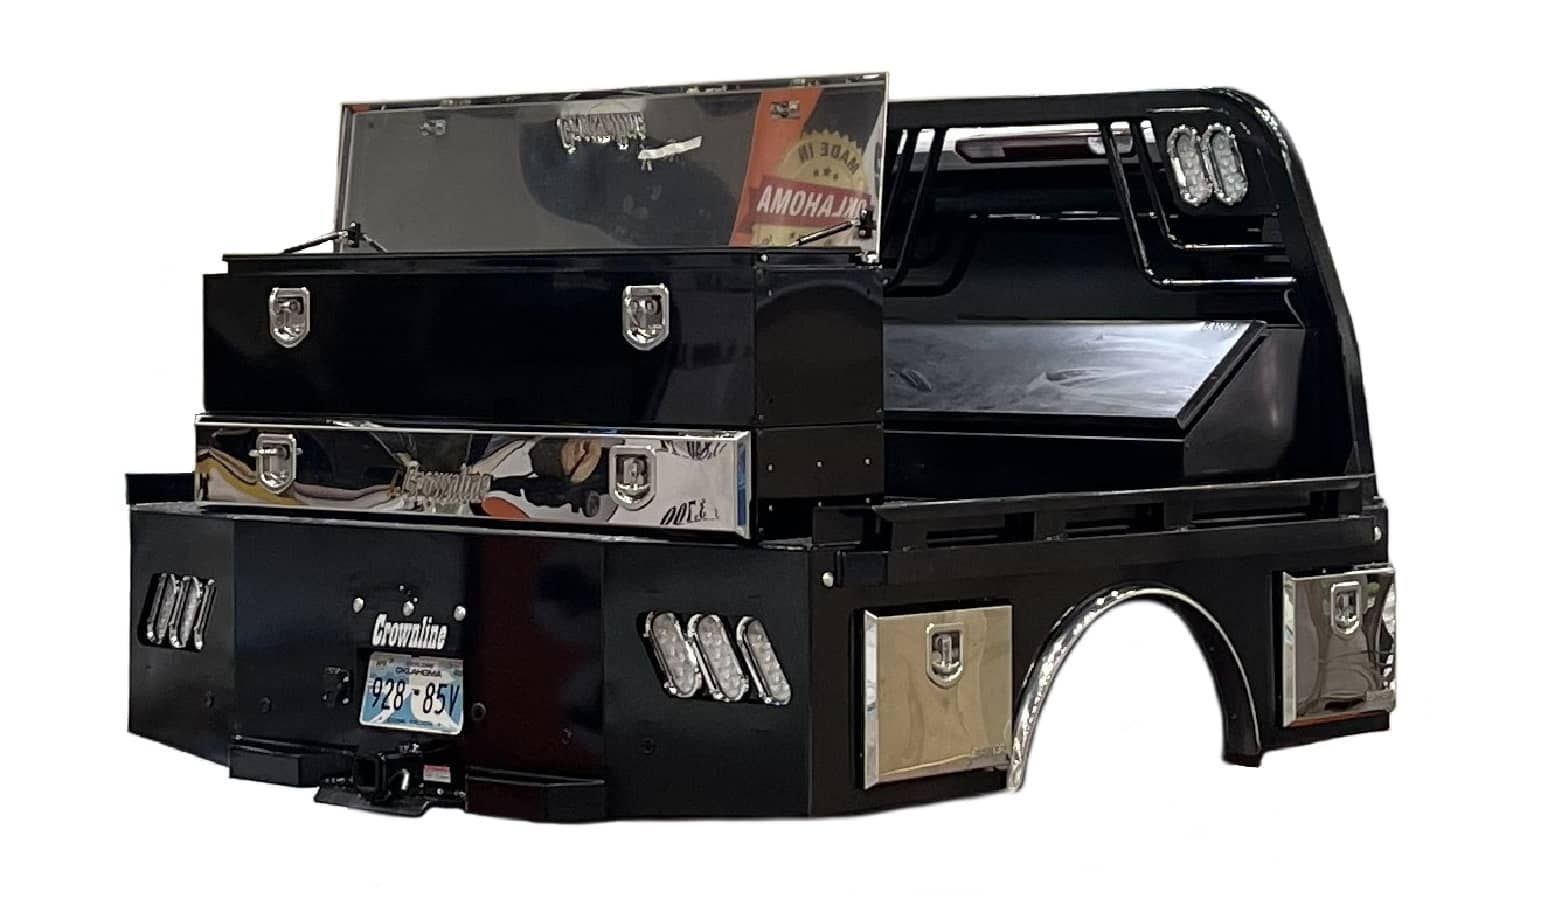 A black truck bed with a stainless steel toolbox on top of it.